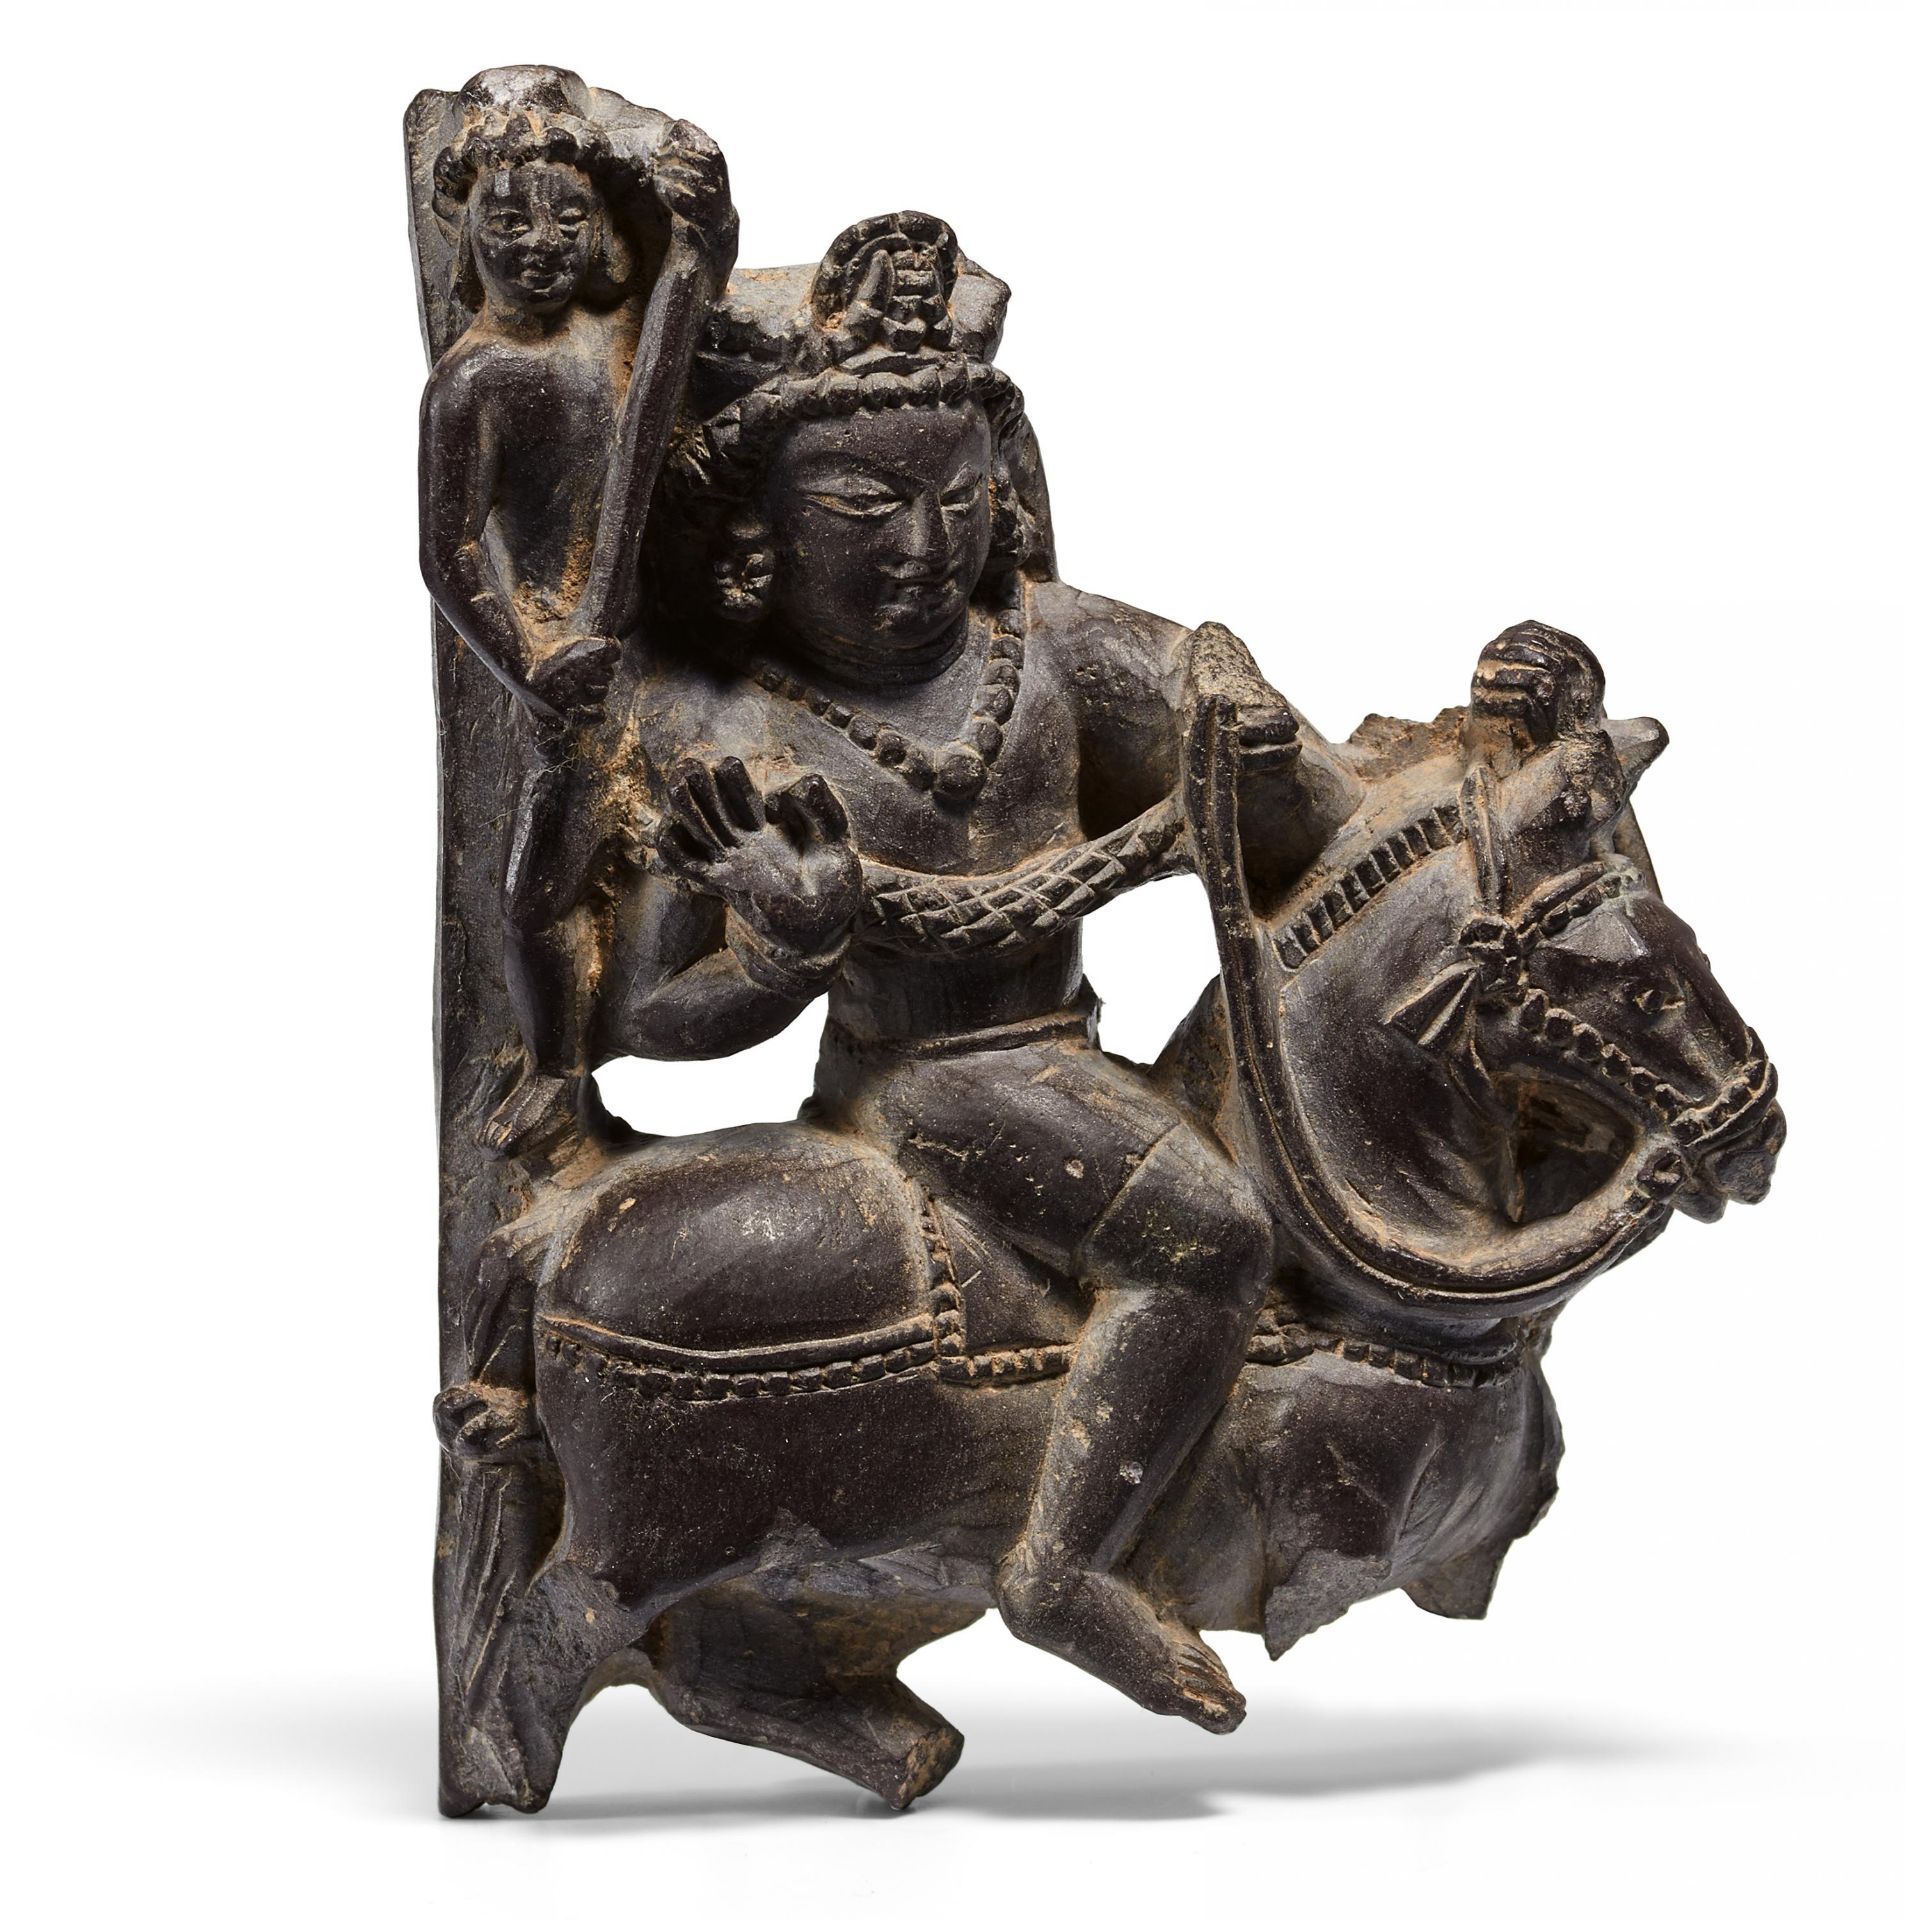 EXTREMELY FINE REPRESENTATION OF PRINCE SIDDHARTA ON HIS HORSE KANTHAKA. Origin: North India.